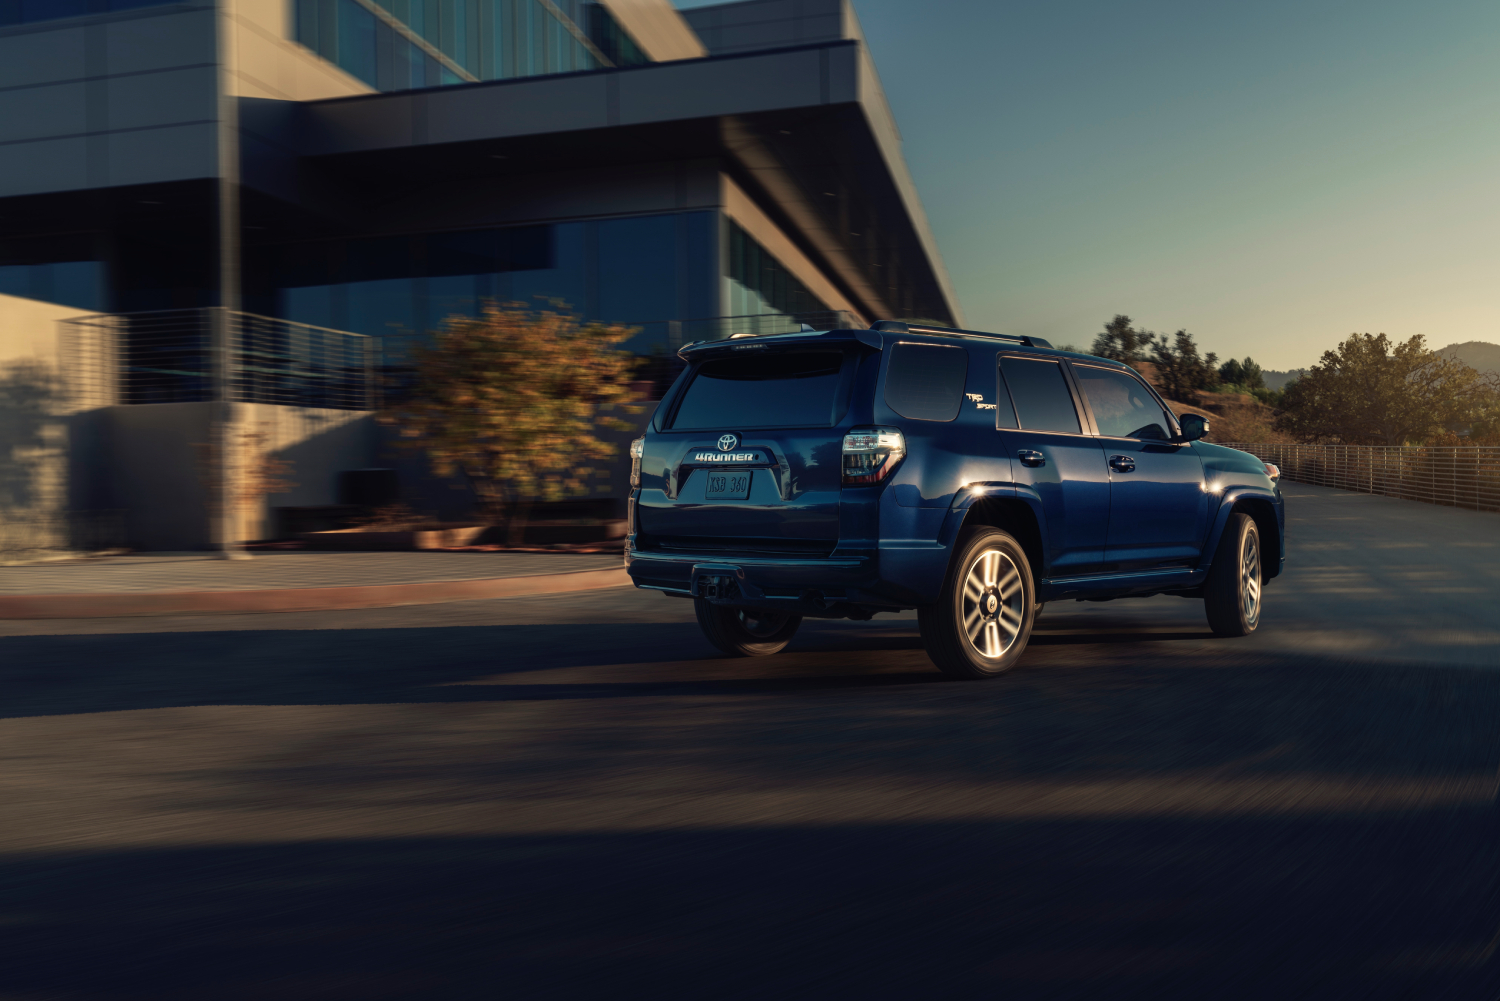 The 2022 Toyota 4Runner caused a disagreement with Consumer Reports and iSeeCars